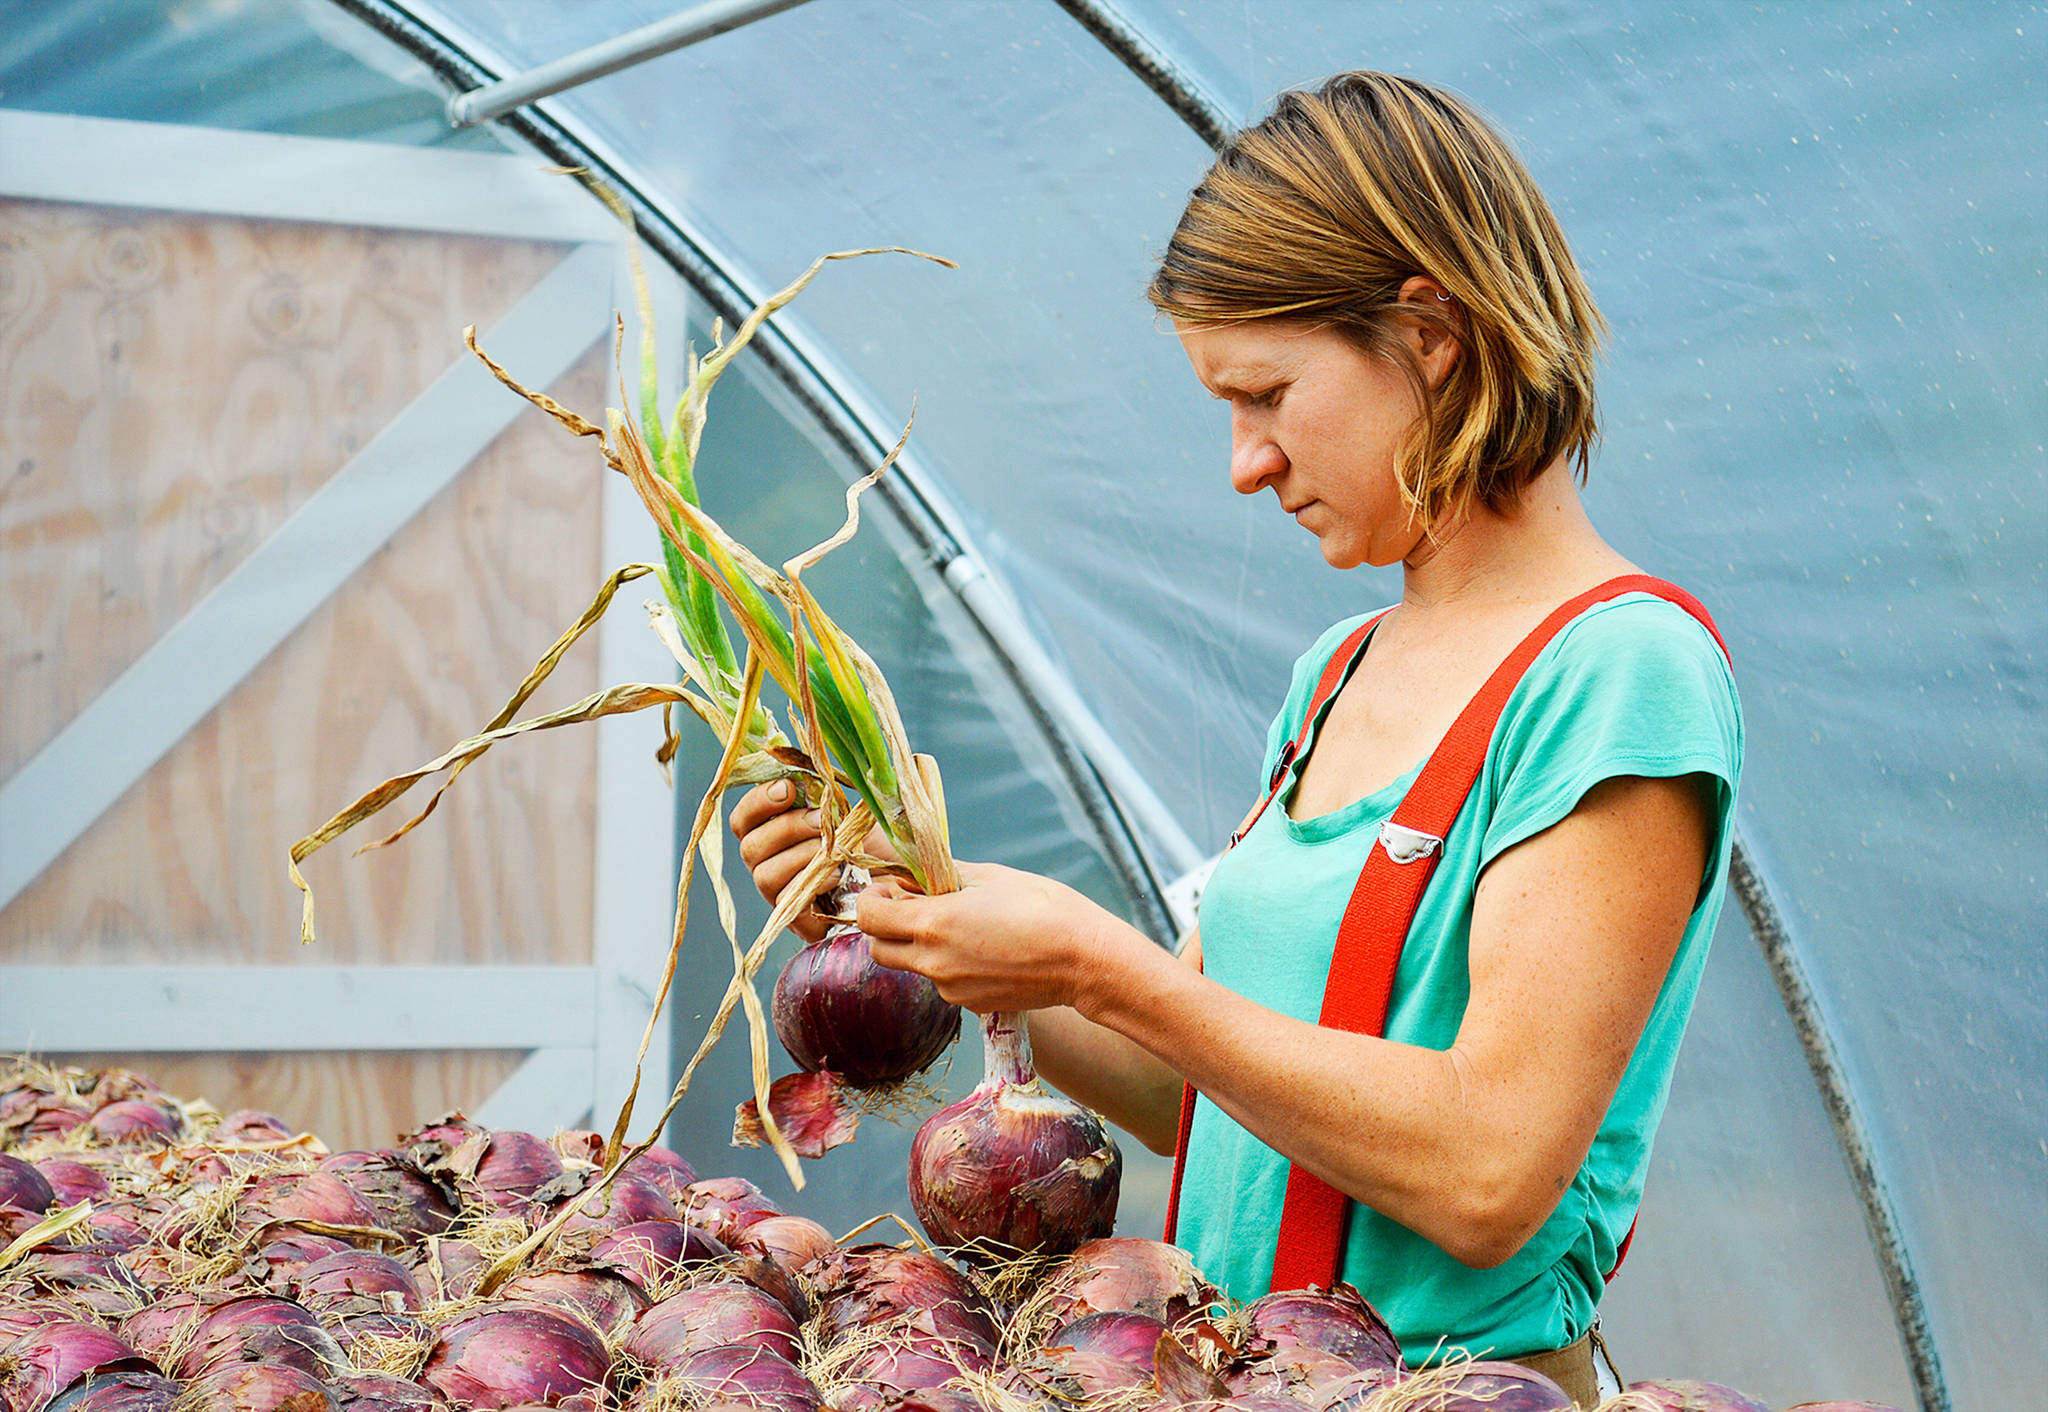 Kylie Neal inspects drying onions at Kettle’s Edge Farm Monday. Fresh produce from the farm will be served at a four-course dinner at Oystercatcher as part of Whidbey Island Grown Week, running Sept. 29-Oct. 8. Photo by Laura Guido/Whidbey News-Times